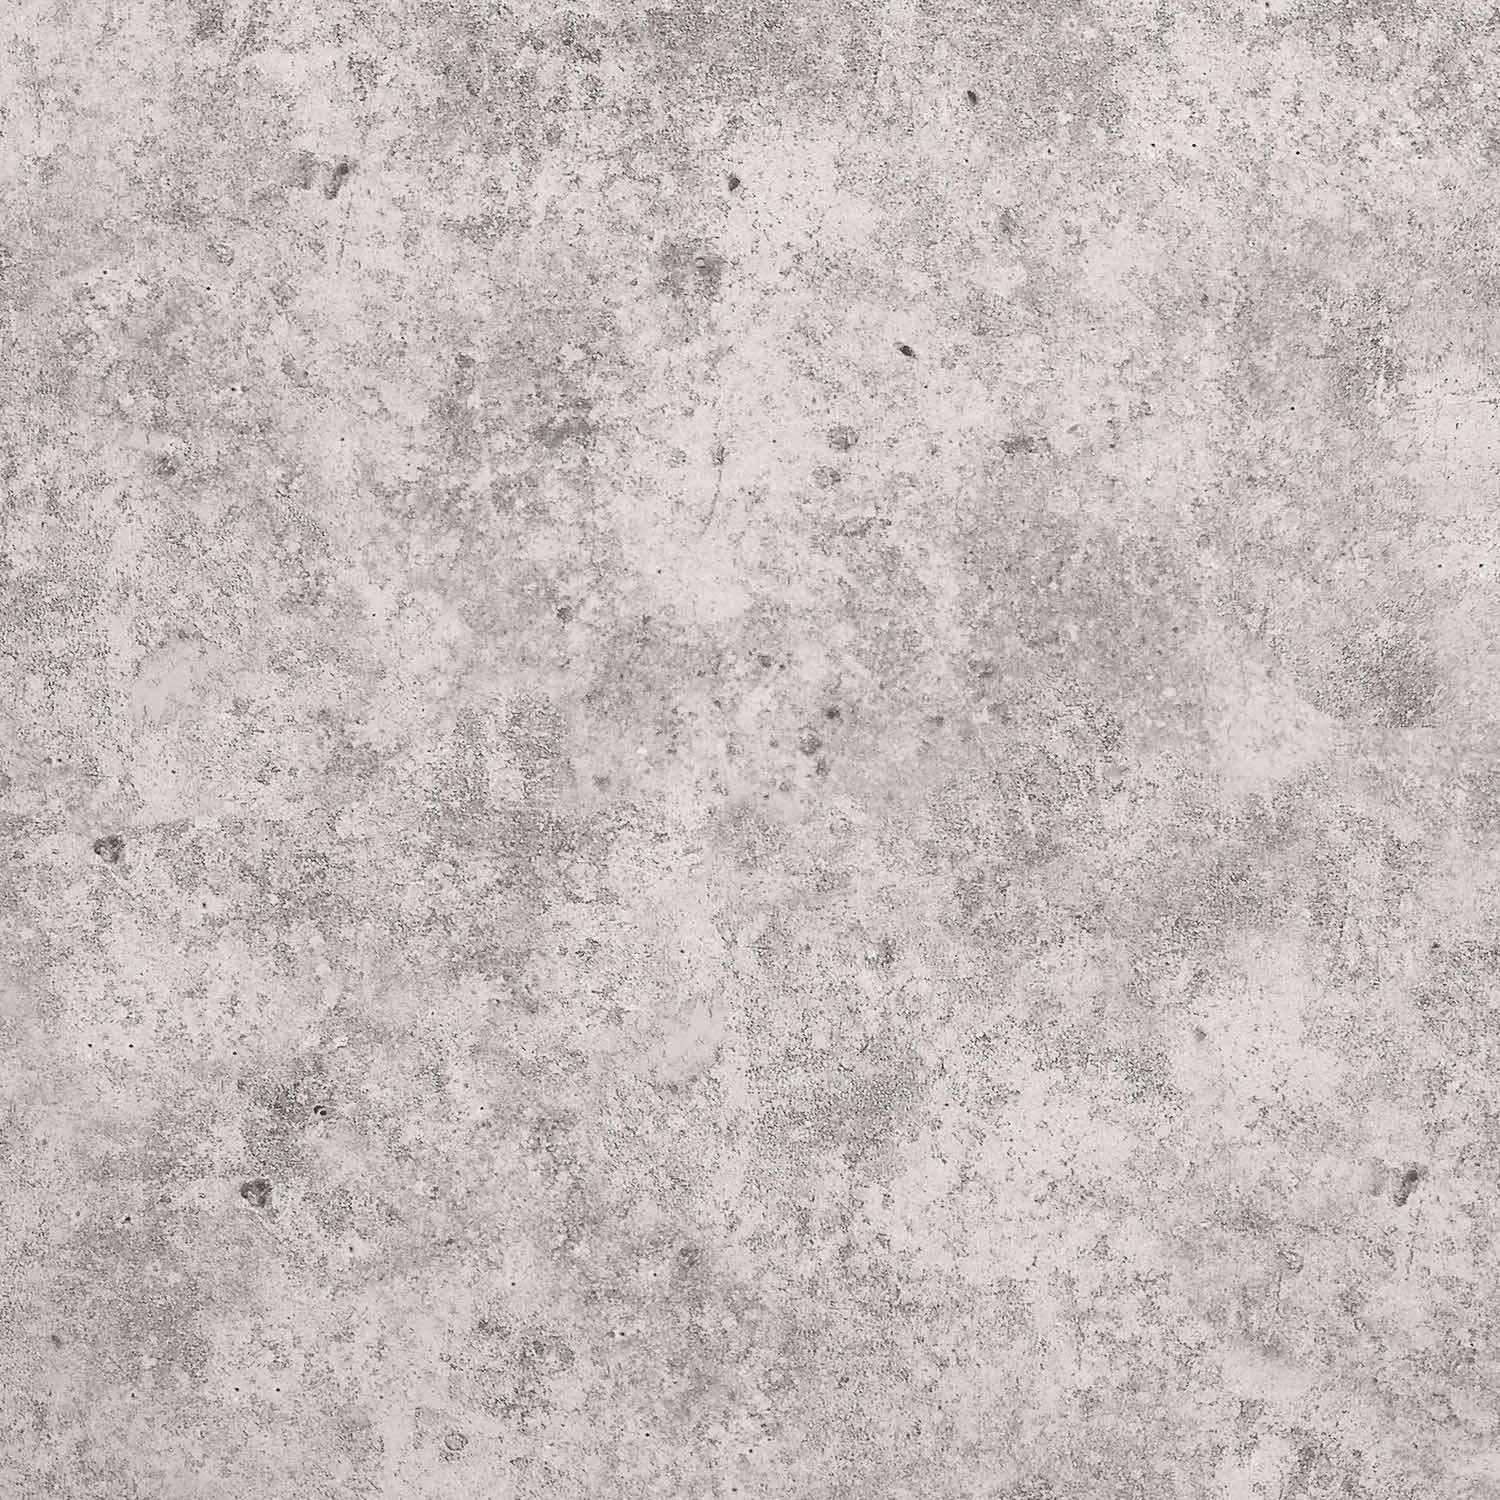 Concrete 1500X1500 Wallpaper and Background Image